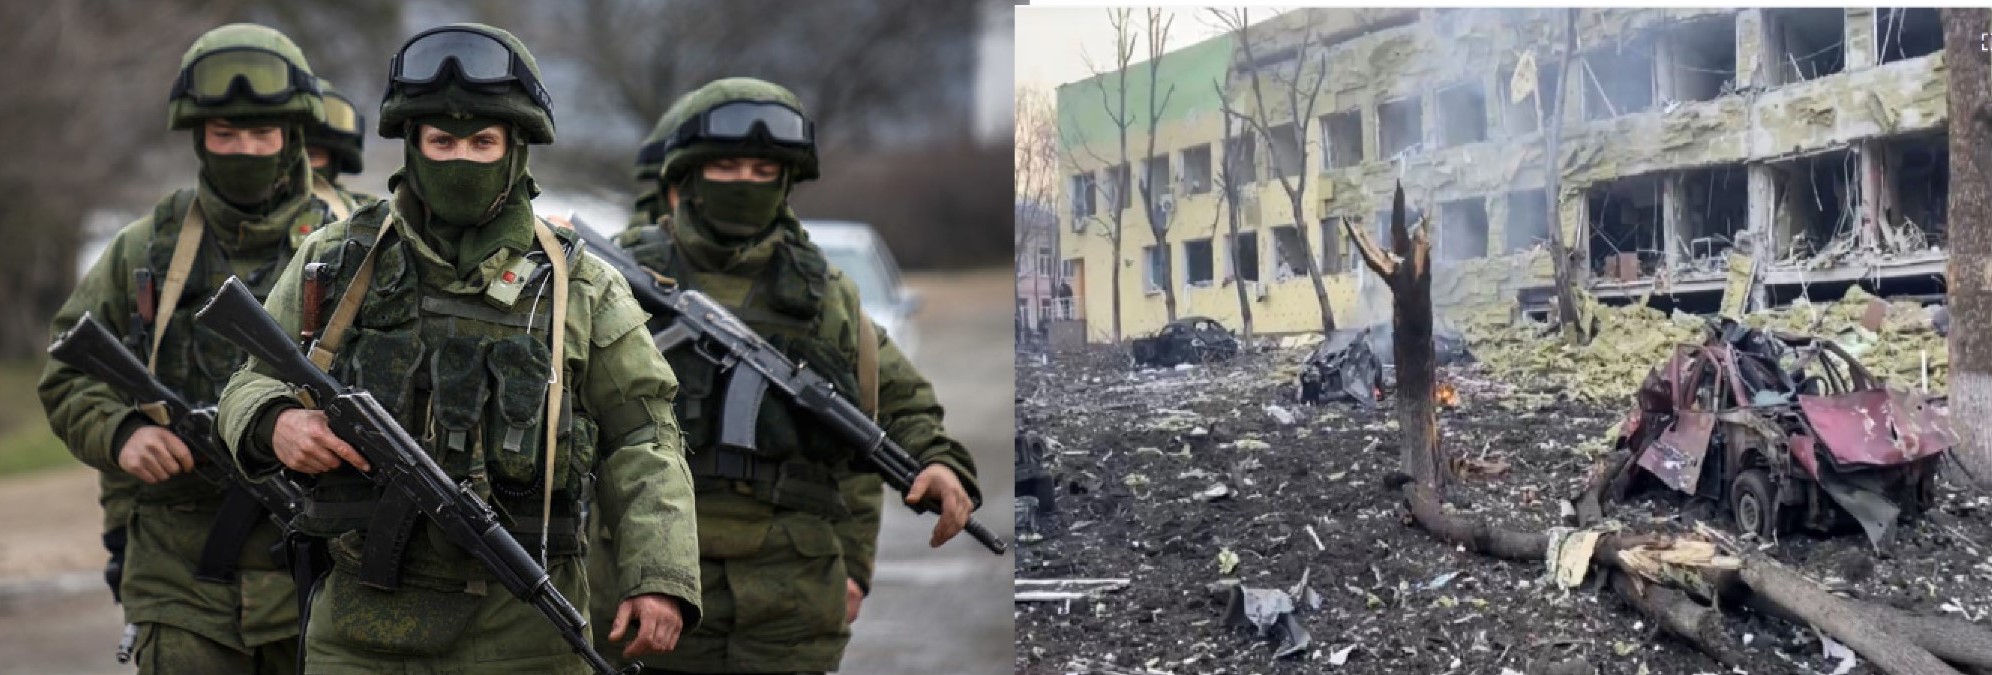 Russian soldiers without insignia who get no mention in Russia’s alternative history of 2014, Mariupol after Russian bombing of a children’s and maternity hospital on 9 March 2022 Photo from the Ukrainian military, posted by Reuters